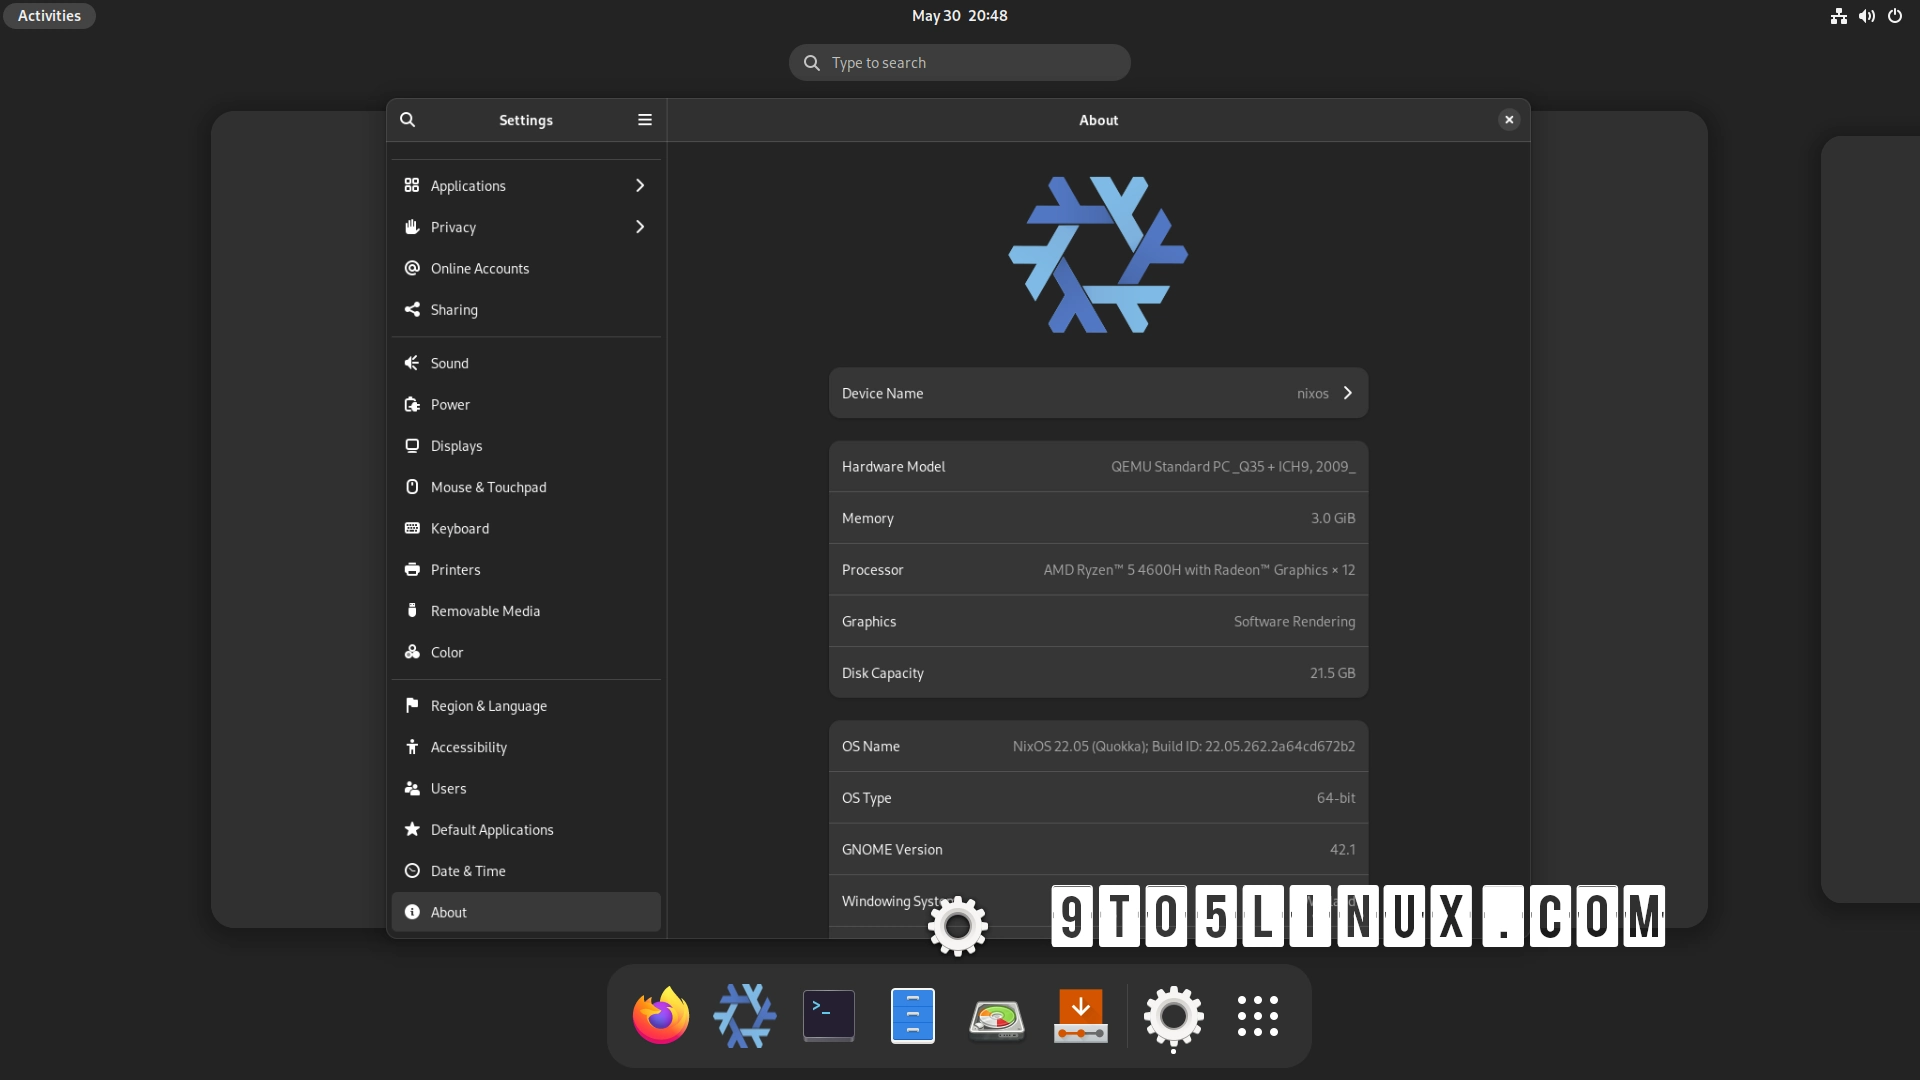 NixOS 22.05 Is Out with GNOME 42.1, Calamares Graphical Installer, and Linux 5.15 LTS